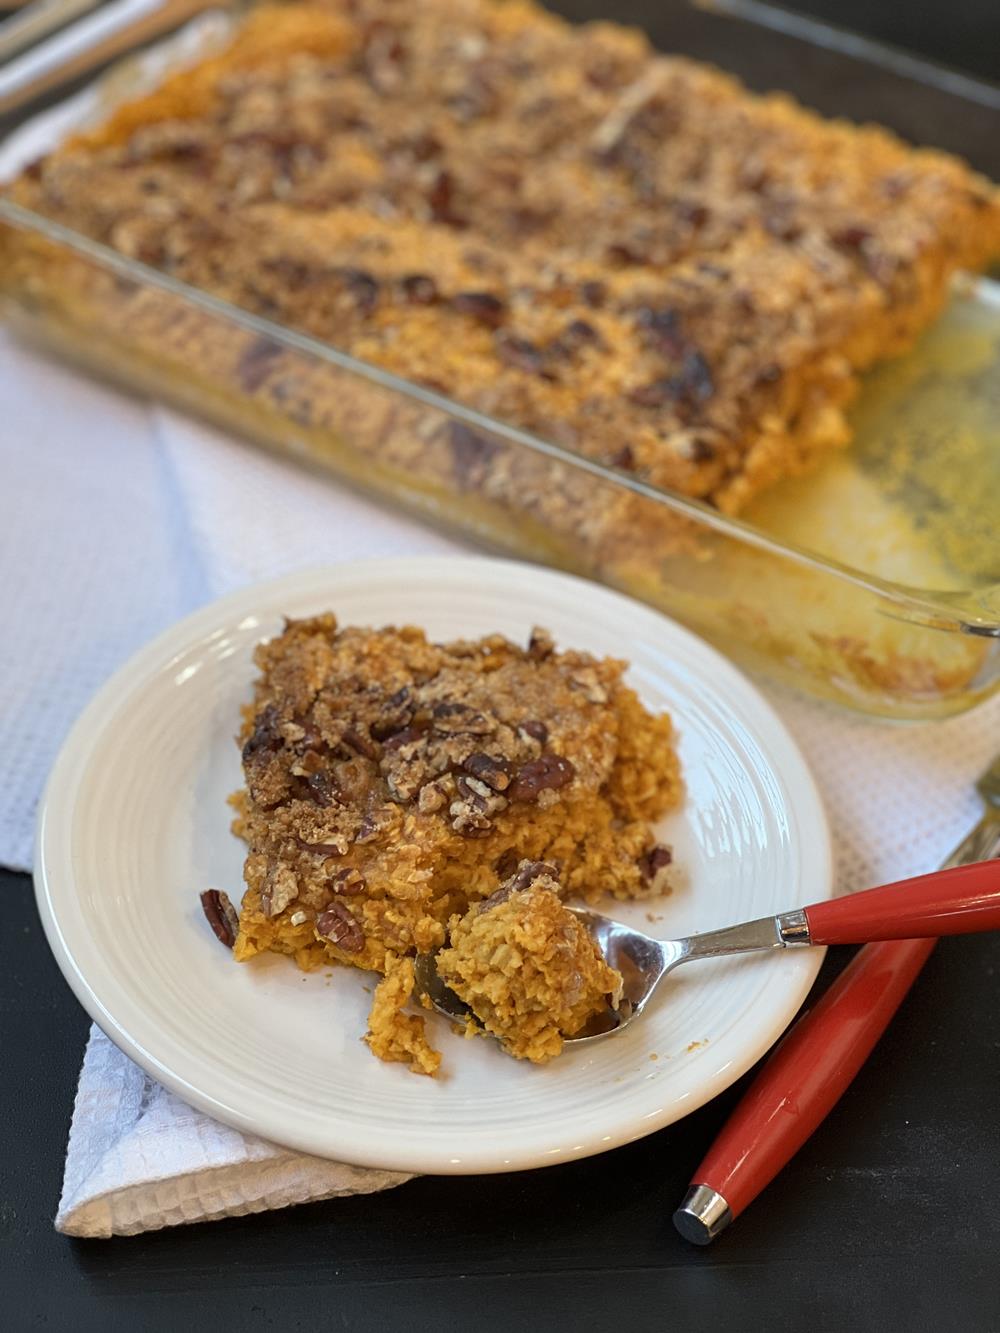 Pumpkin Pecan Baked Oatmeal Recipe on white plate with red handled fork